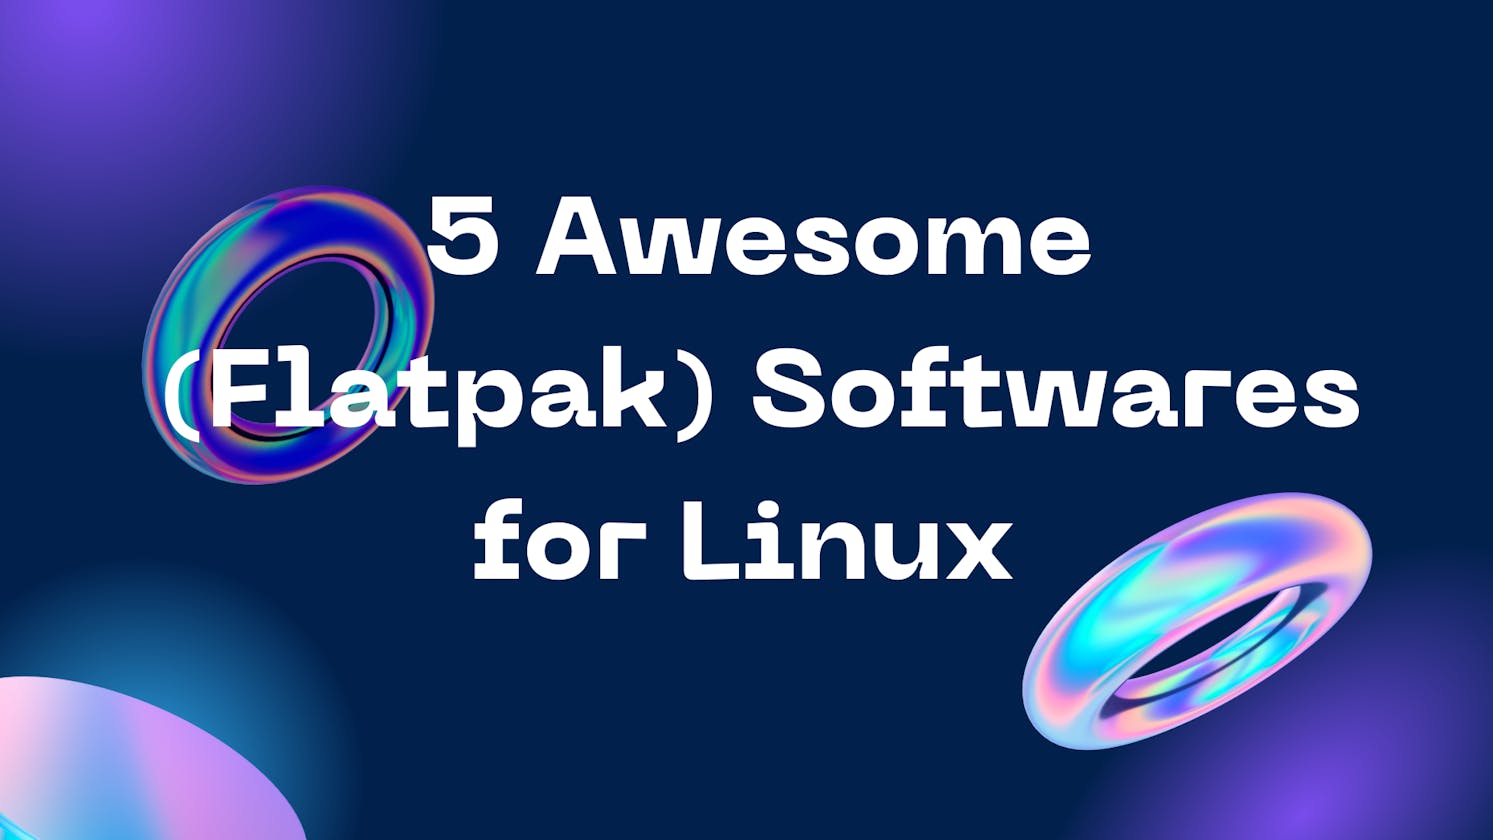 5 Awesome (flatpak) Softwares for Linux